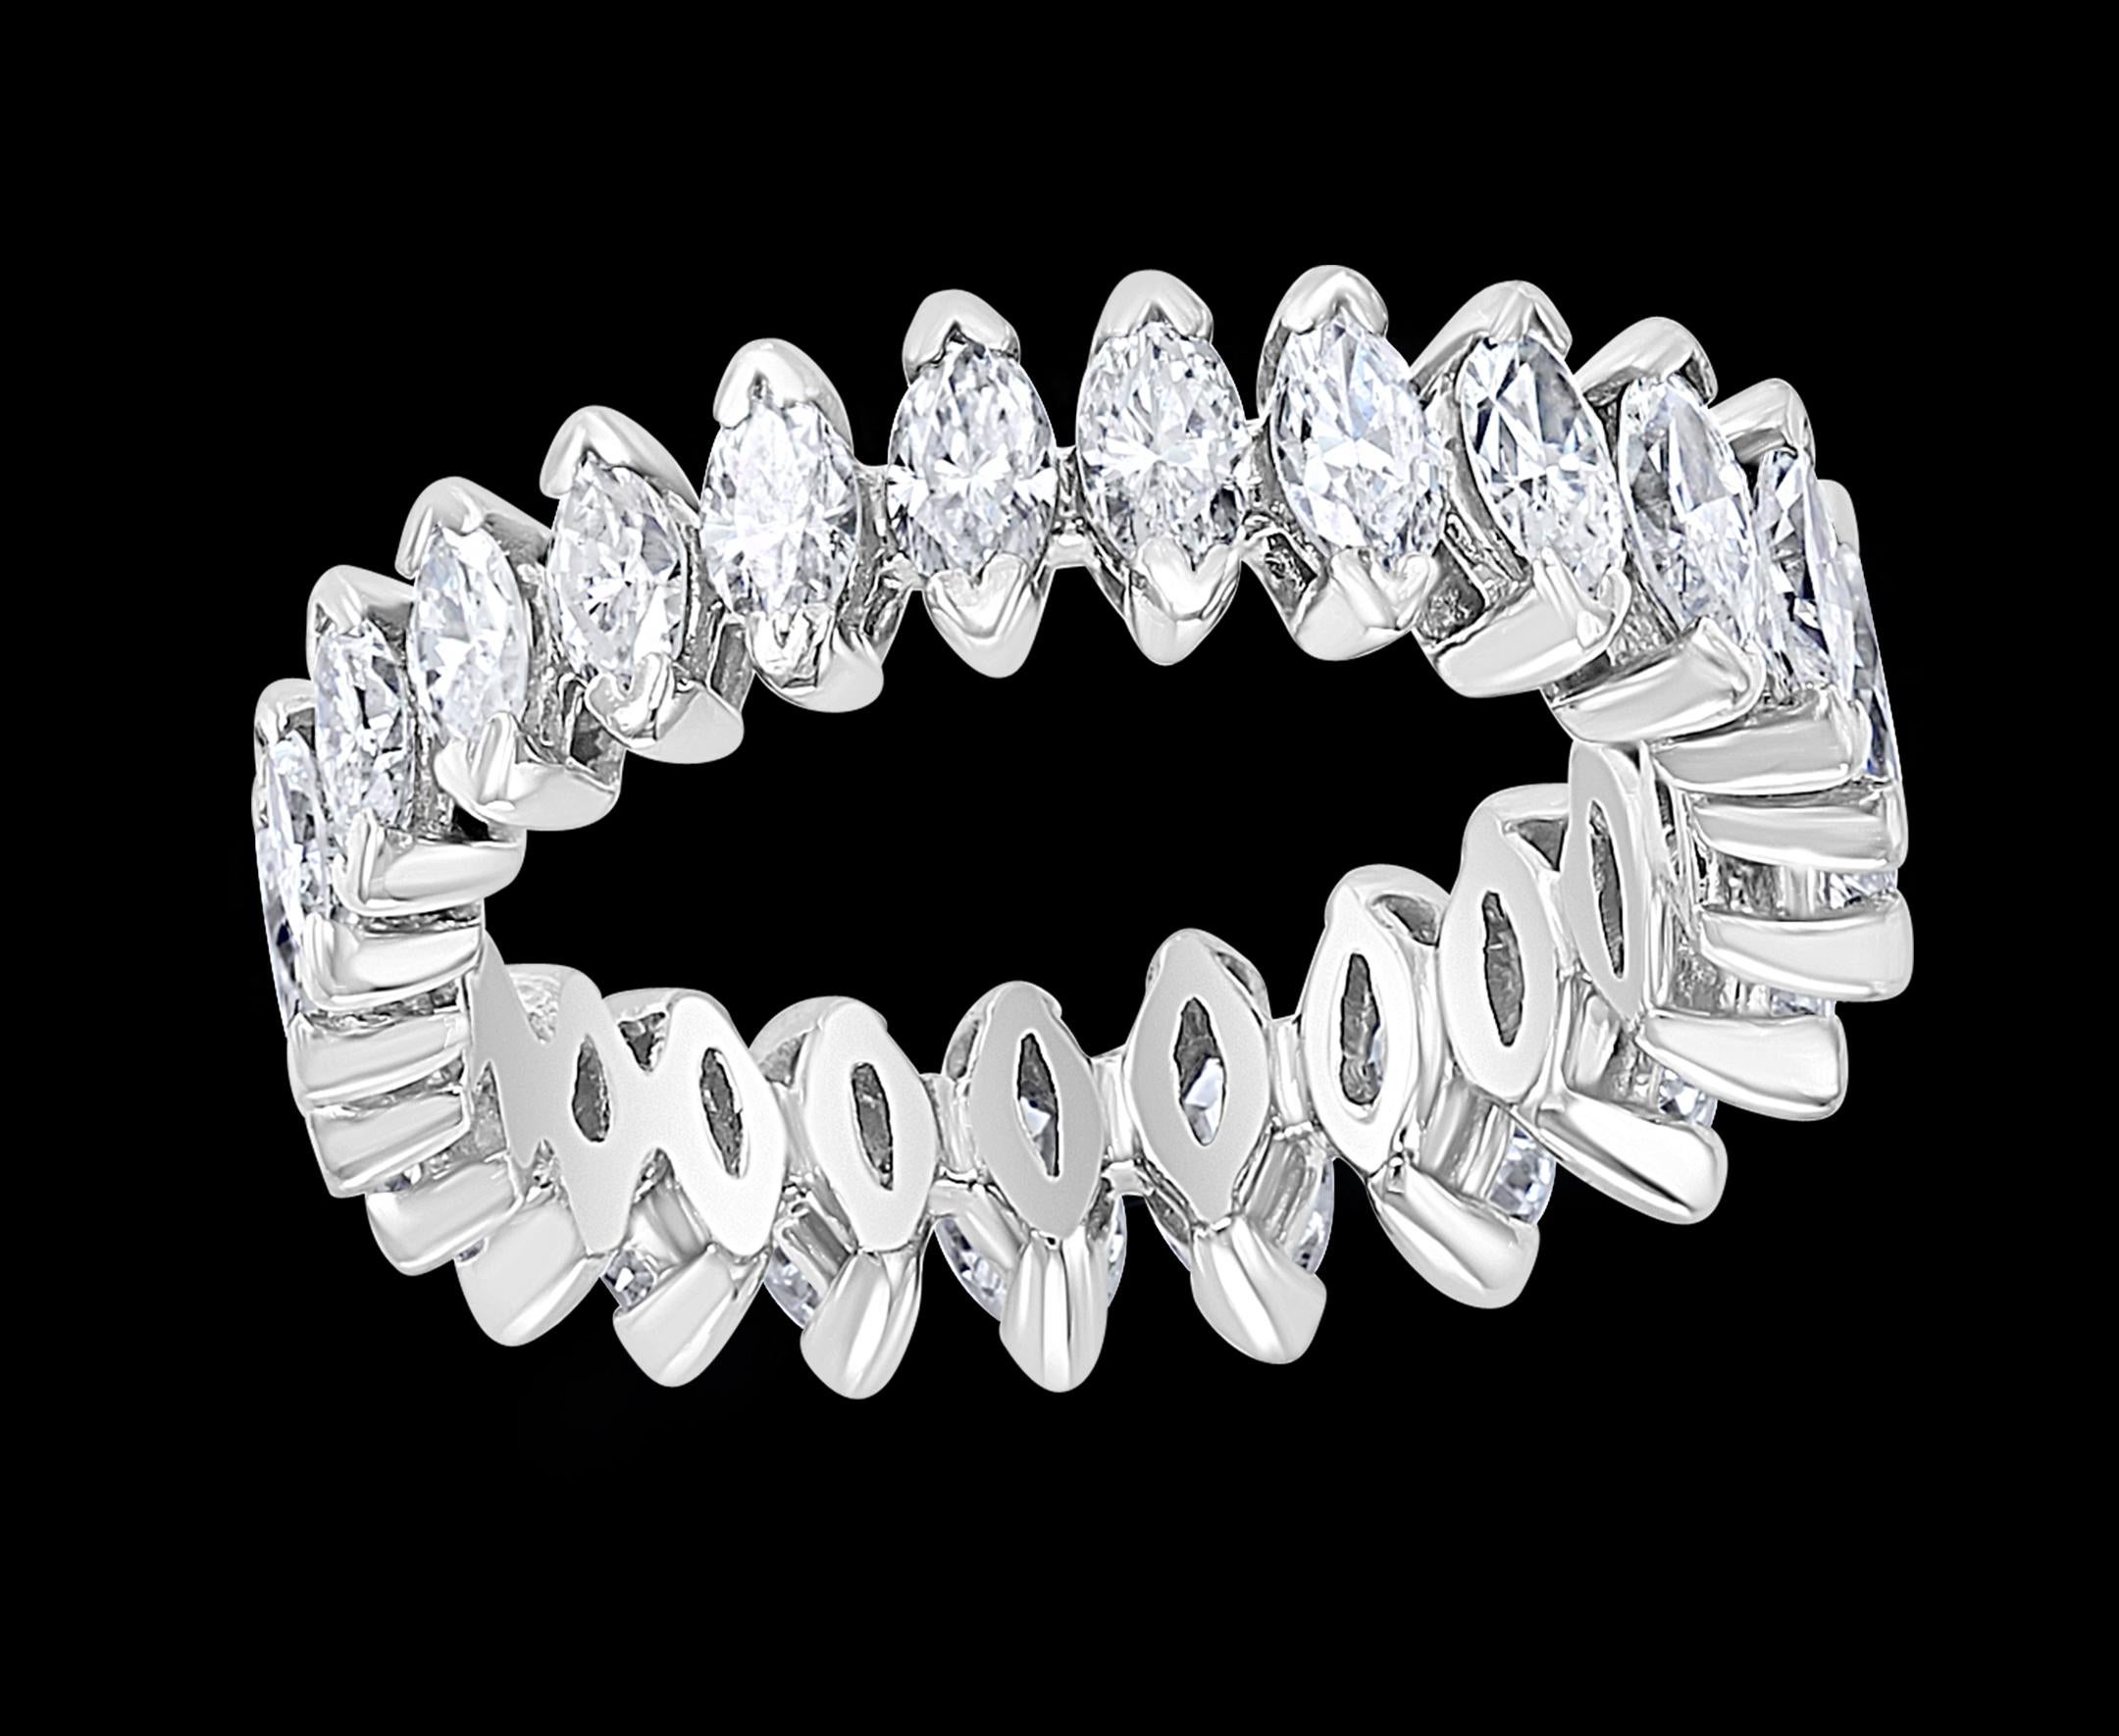 Vintage Approximately 2.7 Carat Diamond Engagement Band with Marquis shape diamonds in 18 Karat Gold 
Diamond VS quality and G color
This is a Engagement band from our premium wedding collection.
24 Pieces of Marquise in graduating size to make a